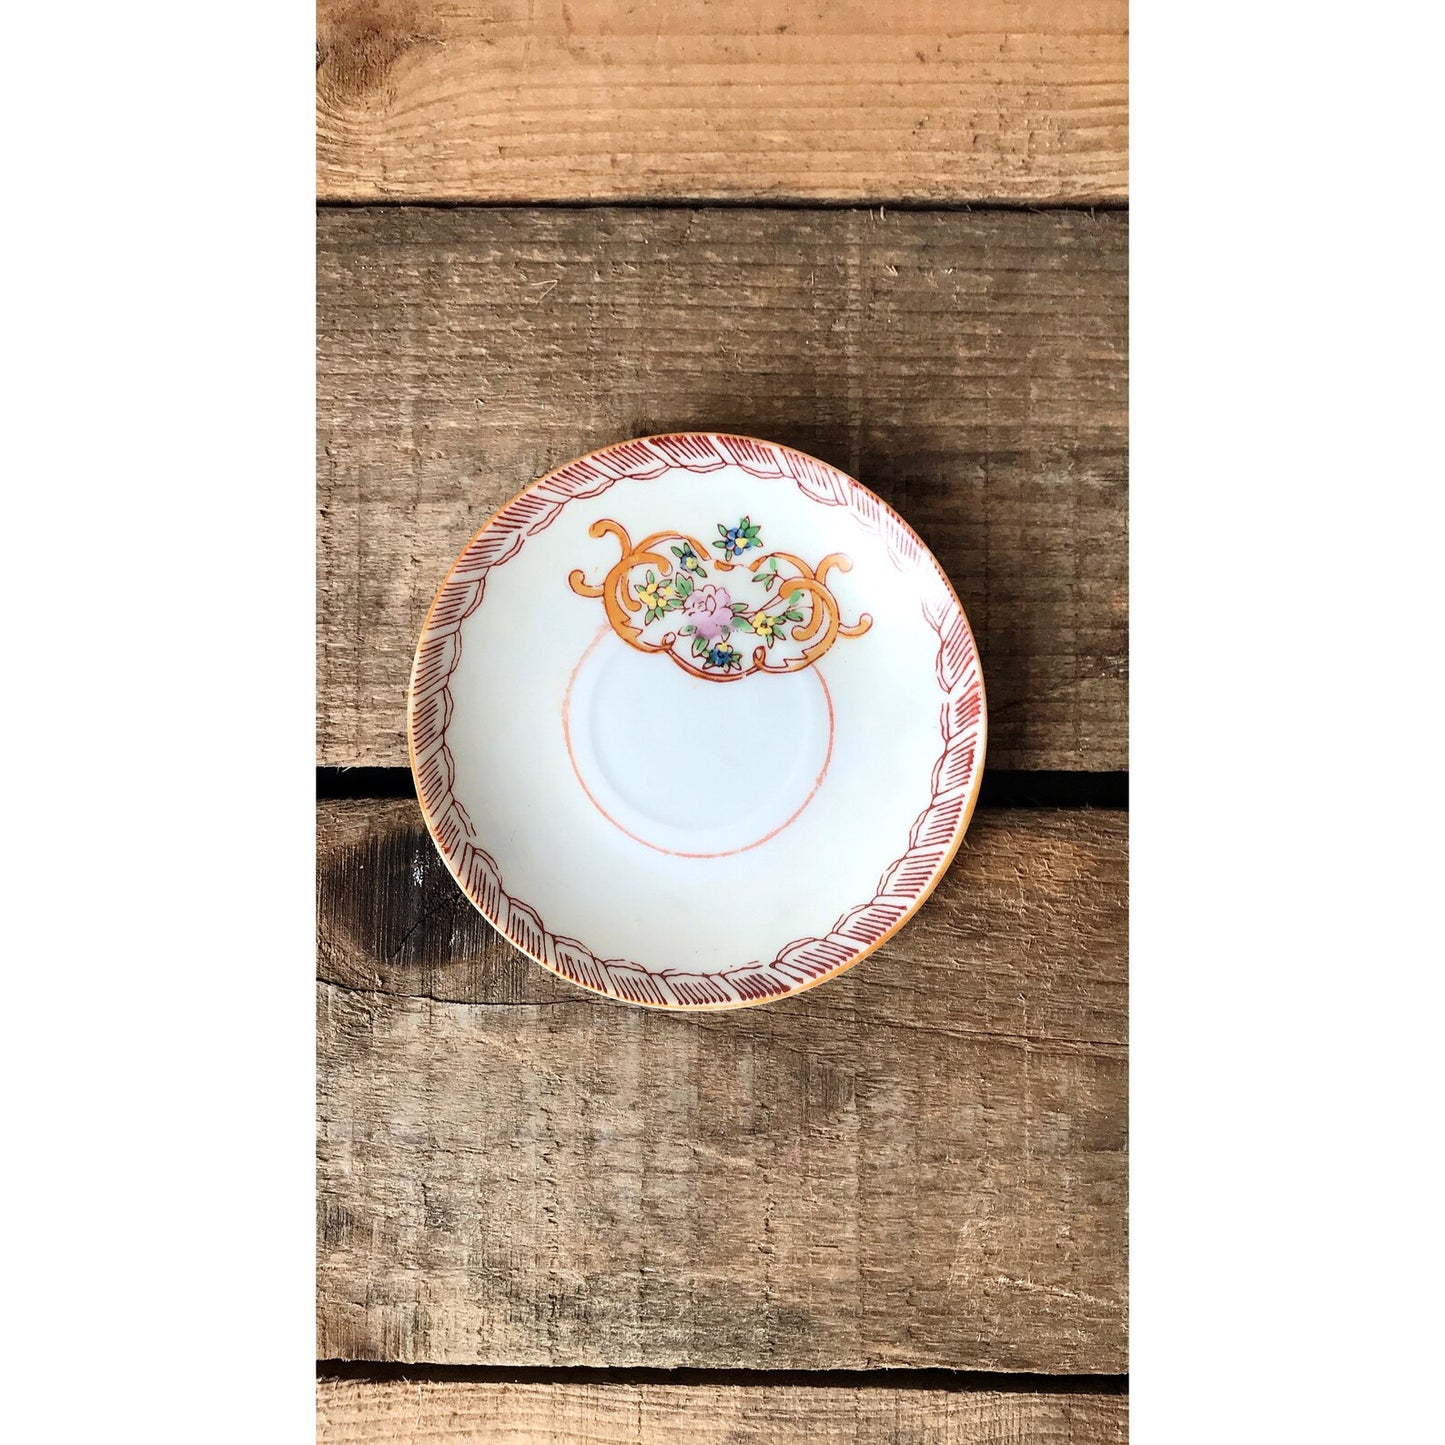 Vintage Hand Painted Saucer